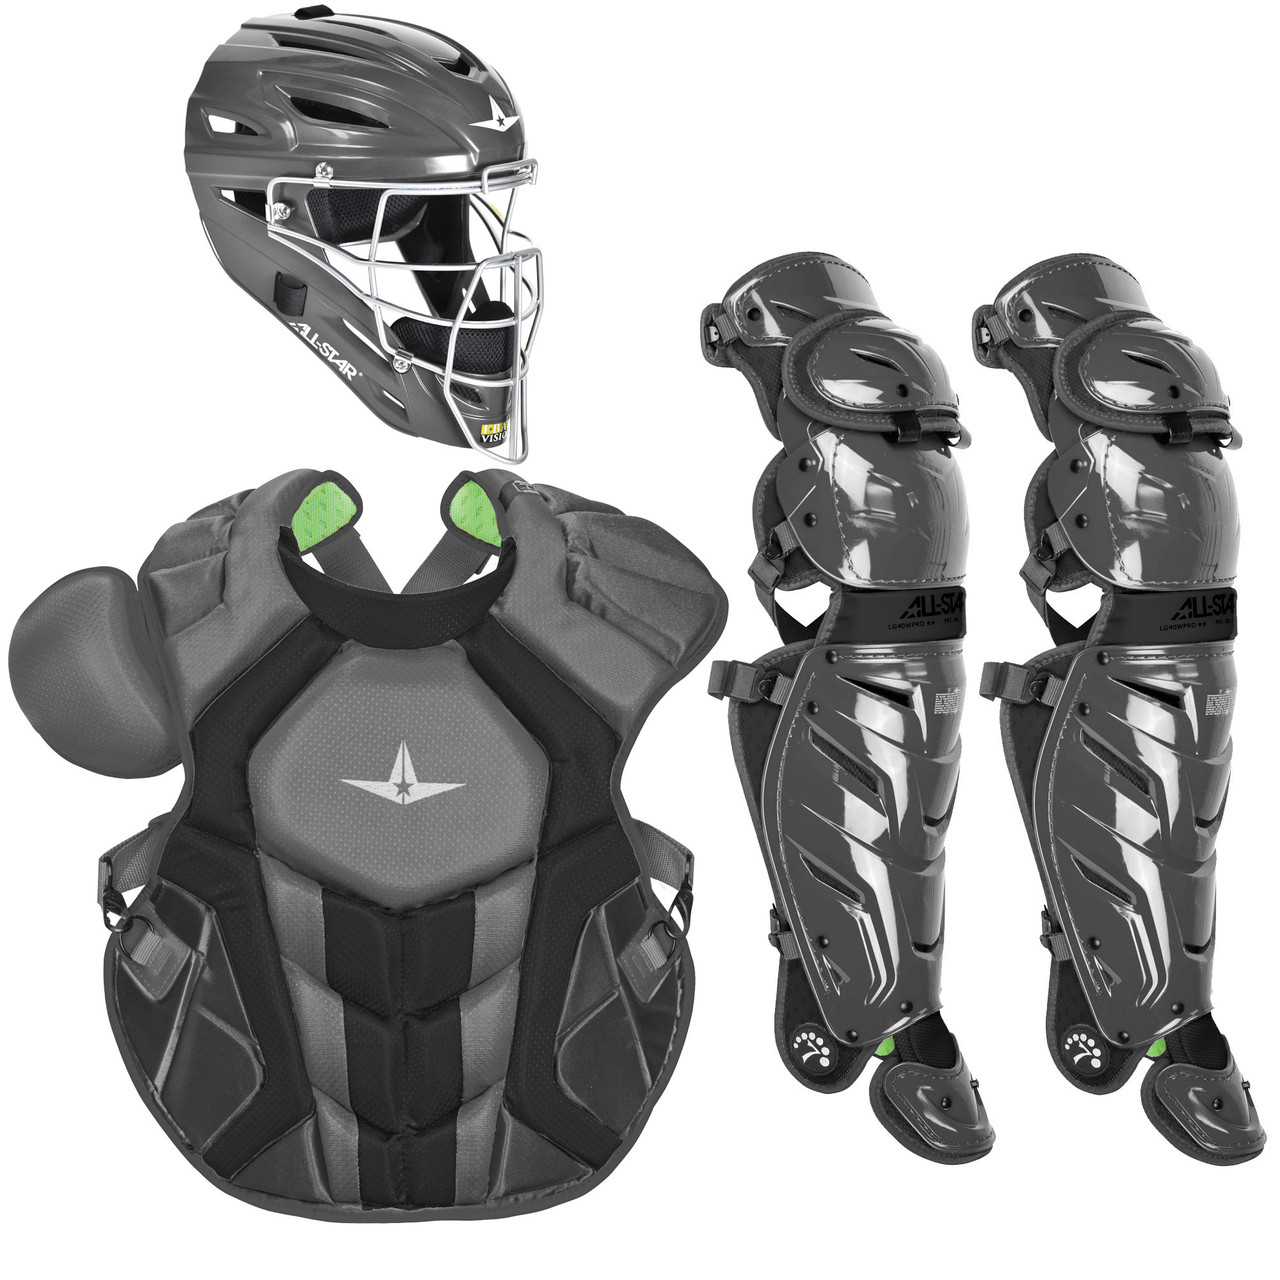 All-Star System7 Axis NOCSAE Adult Baseball Catcher's Package